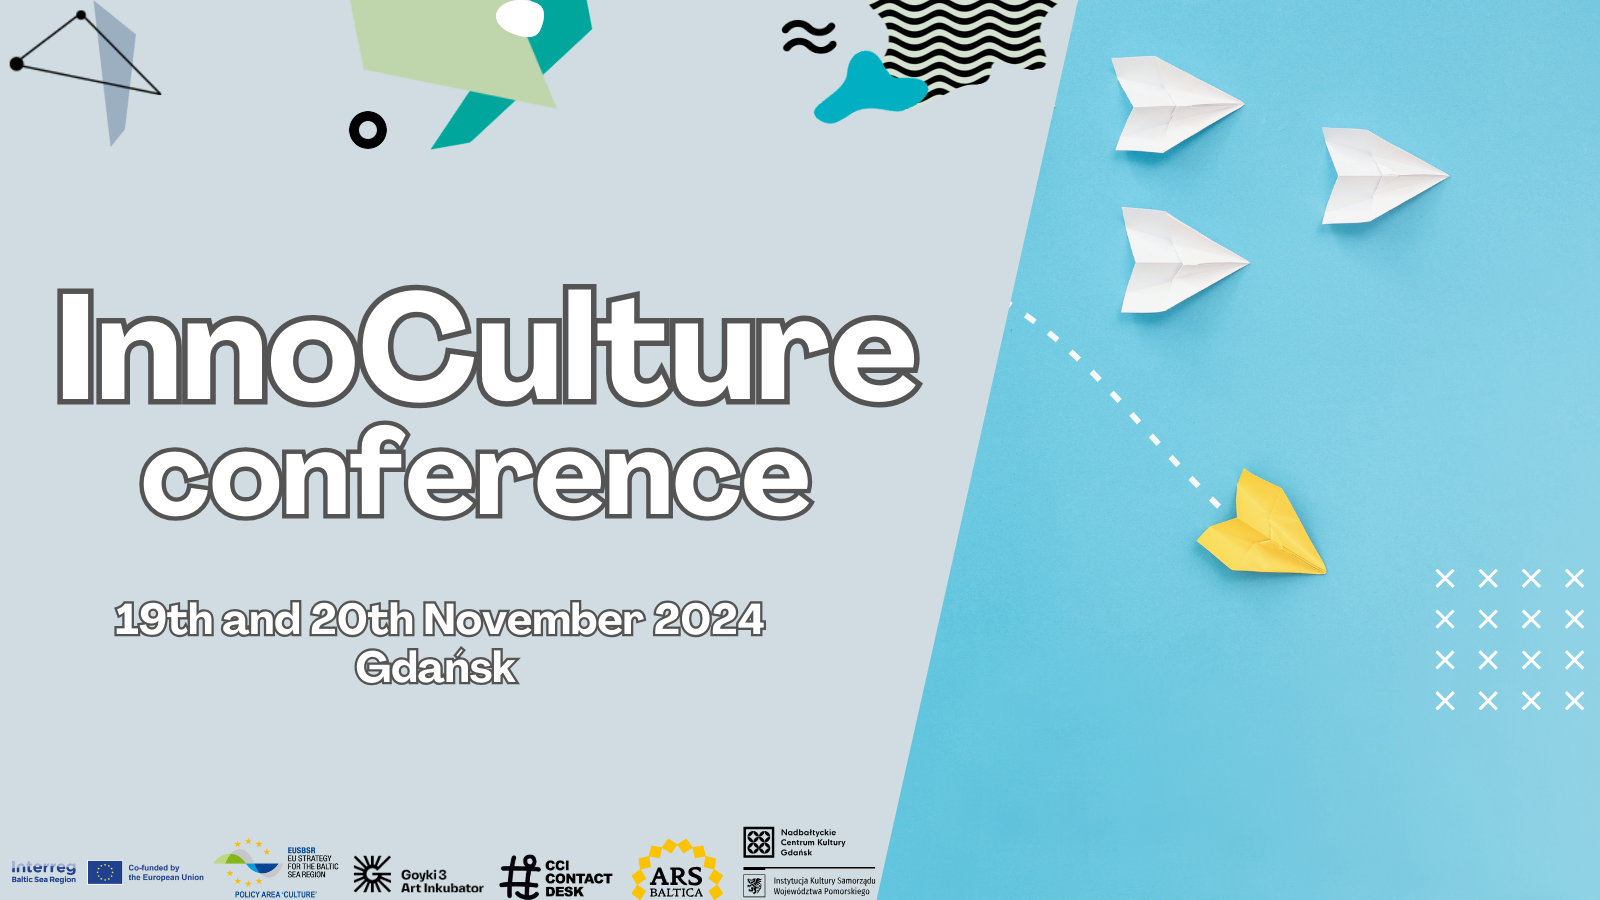 Decorative image advertising the InnoCulture Conferencewith partner logos